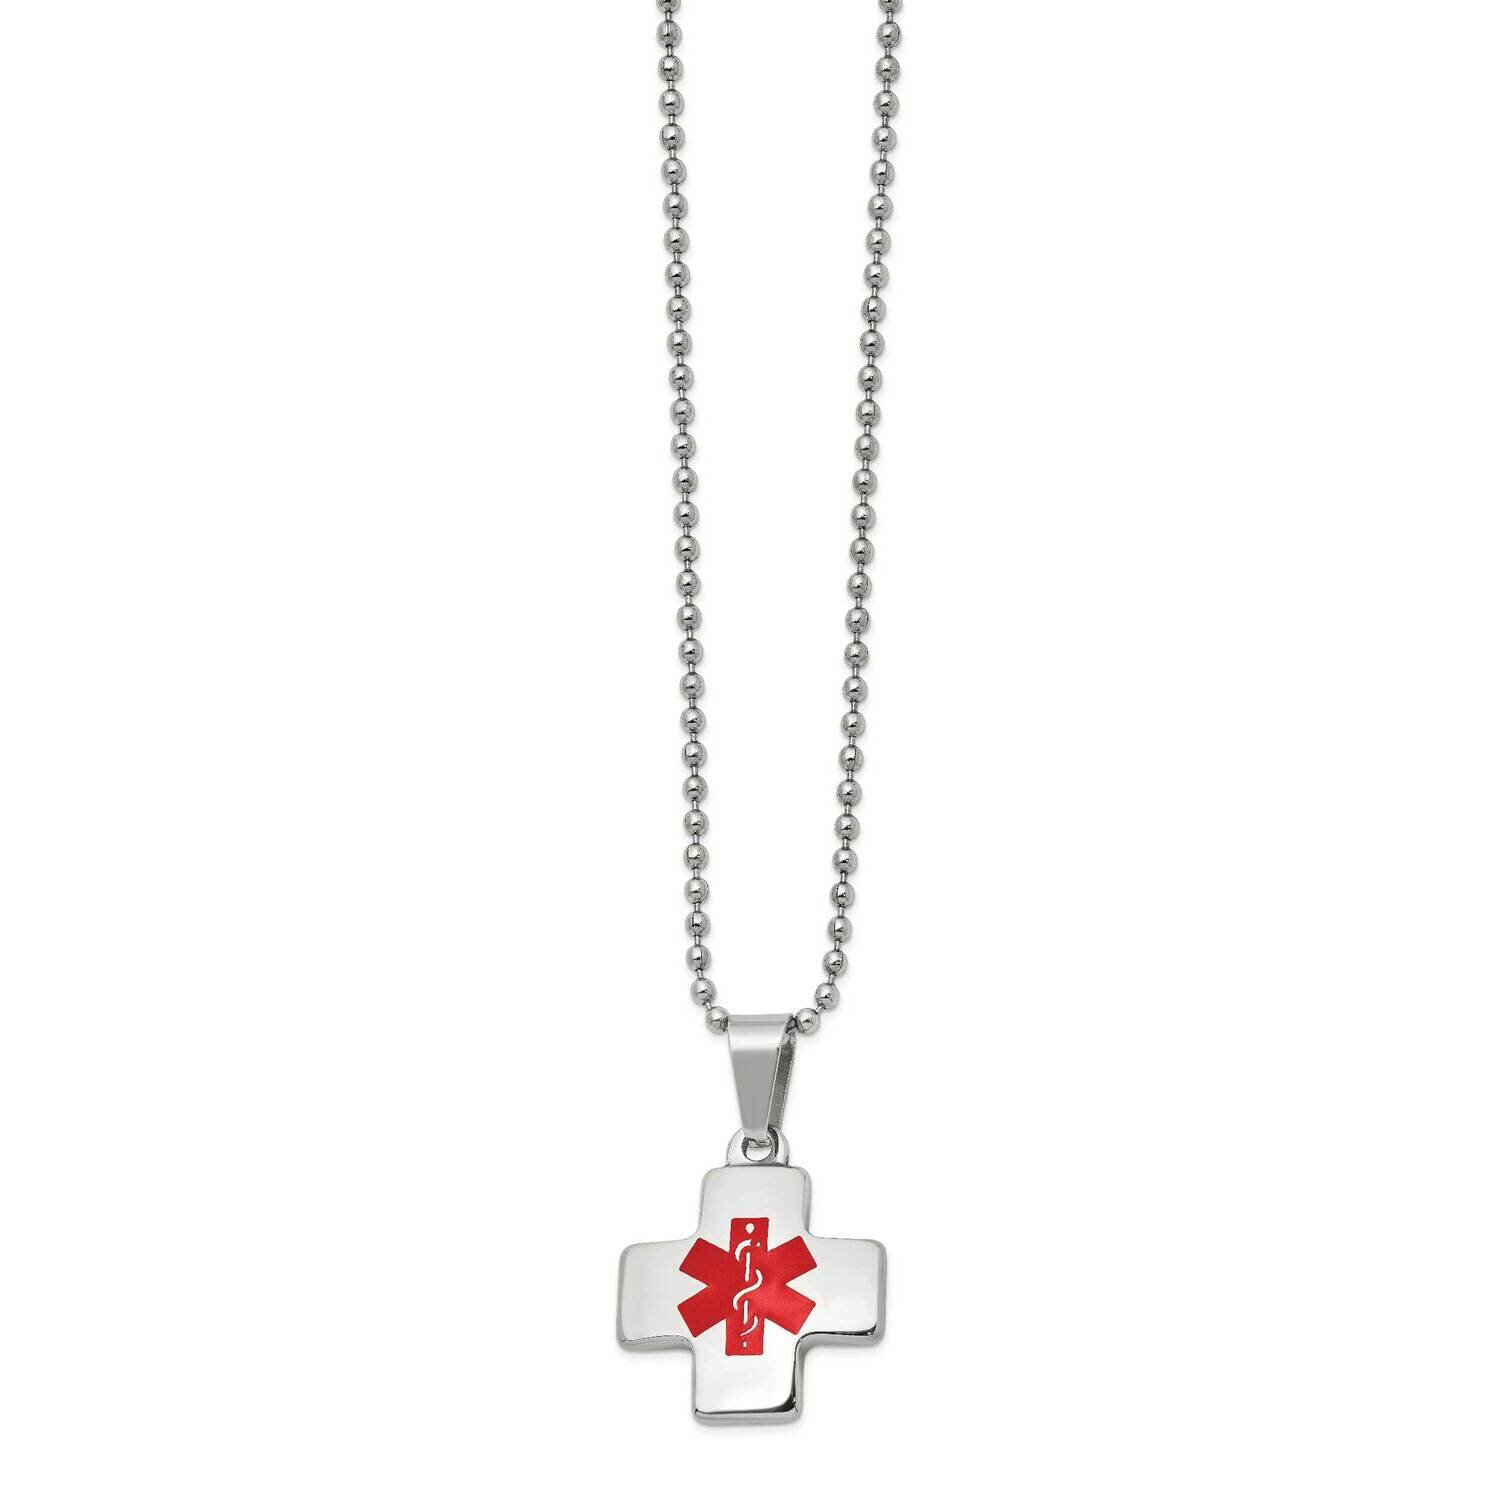 Red Enamel Cross Medical Id 20 Inch Necklace Stainless Steel Polished SRN2760-20